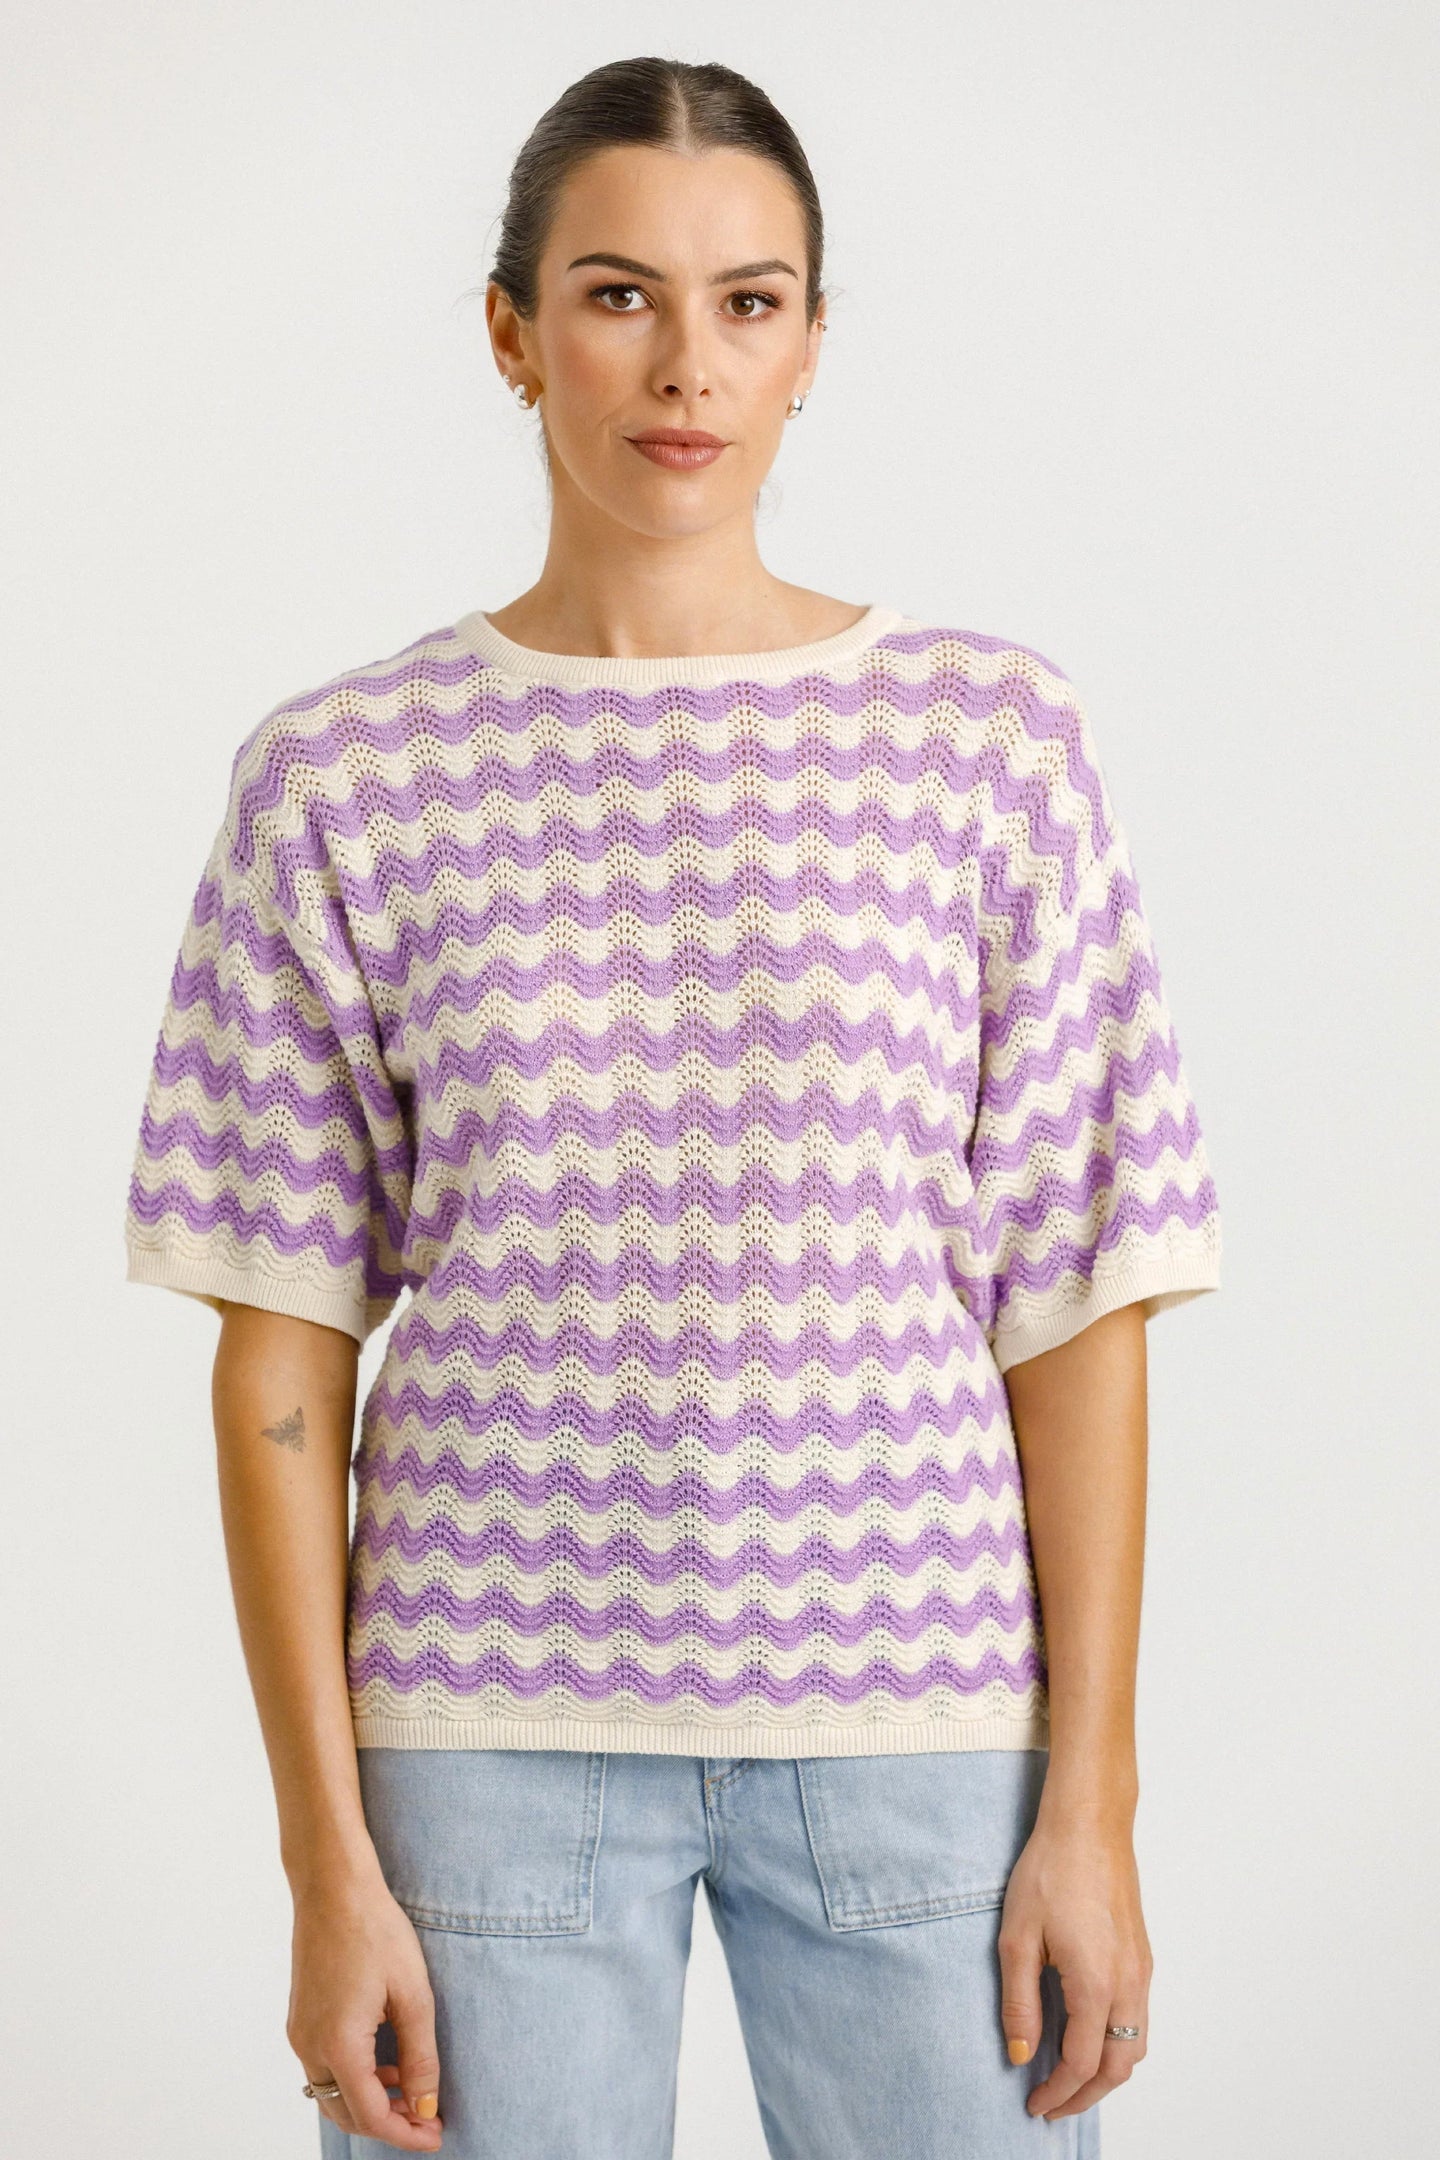 Thing Thing - Squiggle Tee, Creamy Lilac